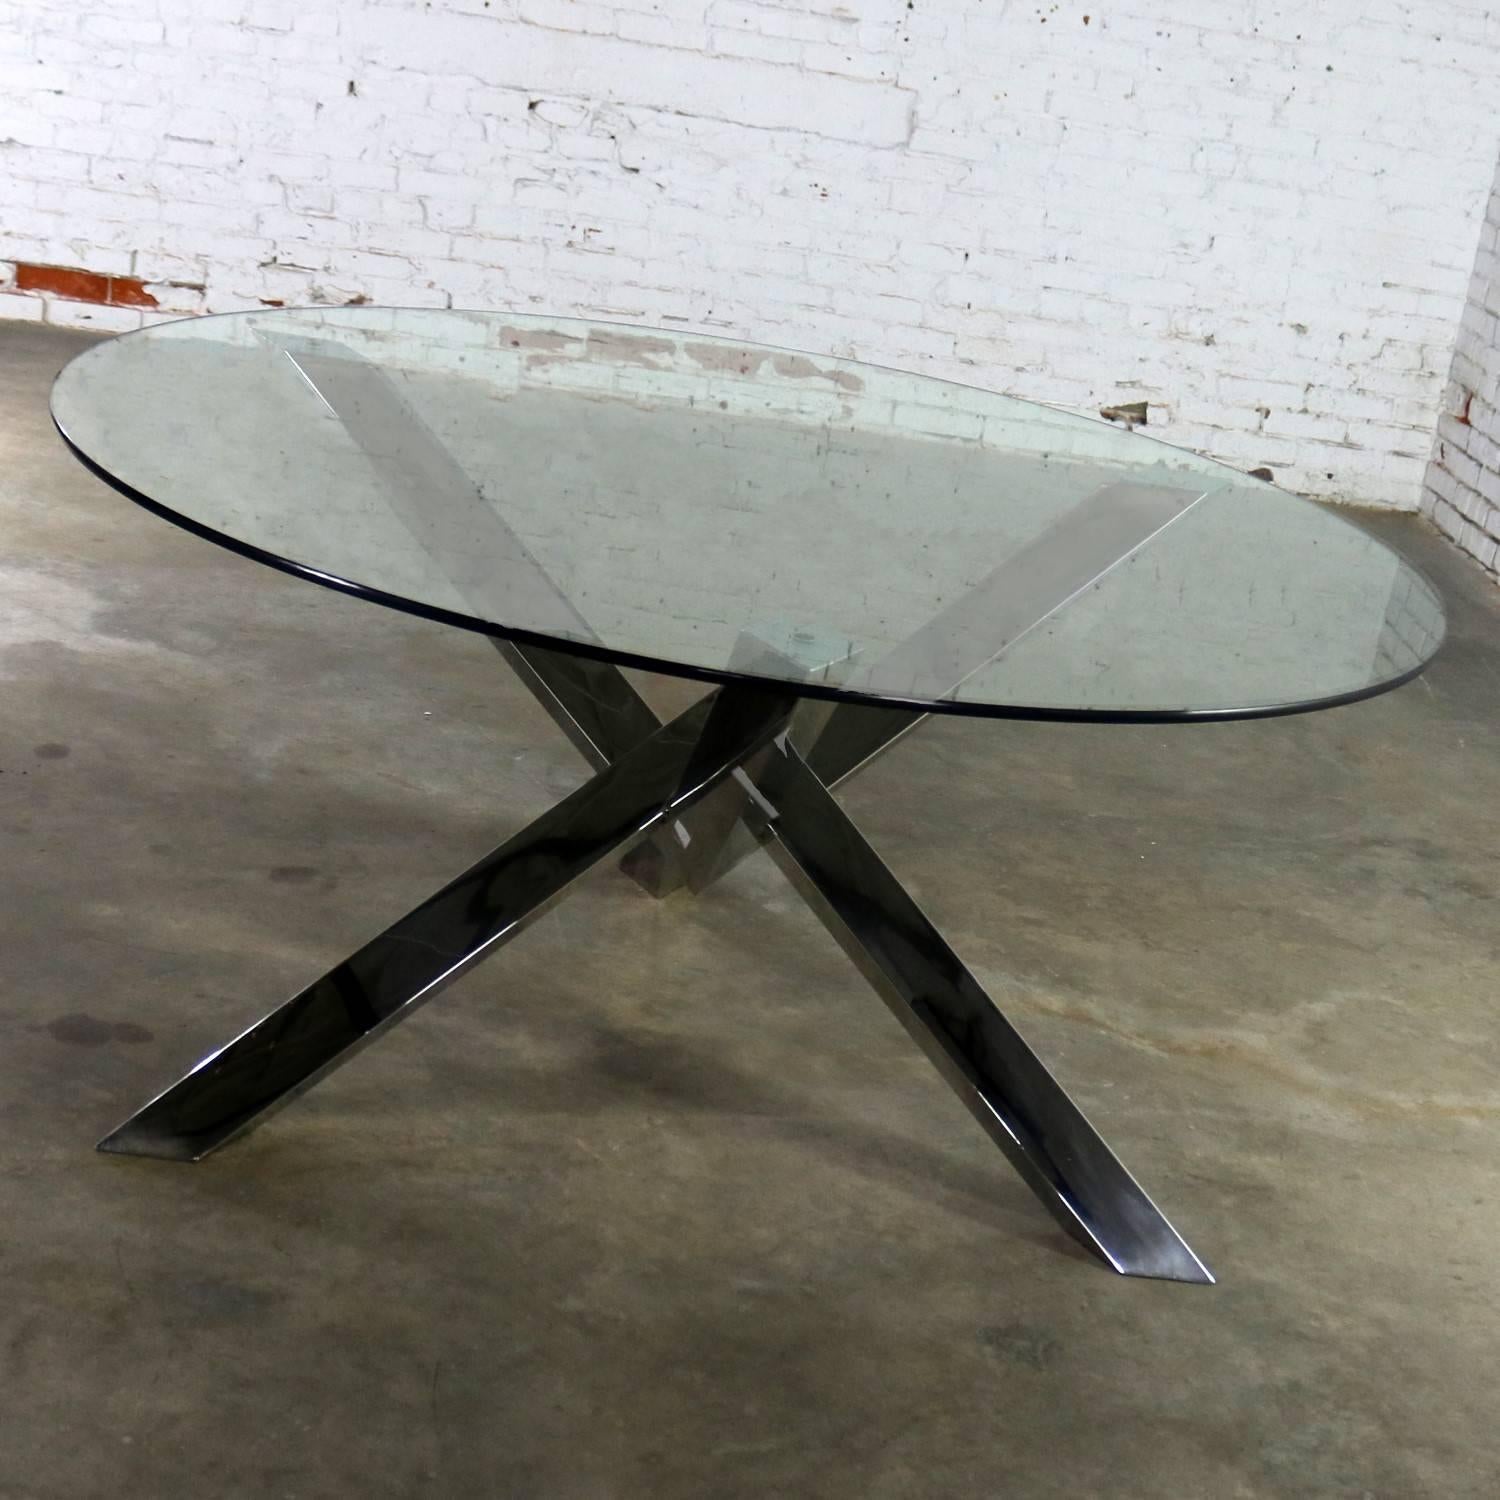 Modern Nuevo Costa Round Stainless-Steel Jacks Style Dining Table with Glass Top